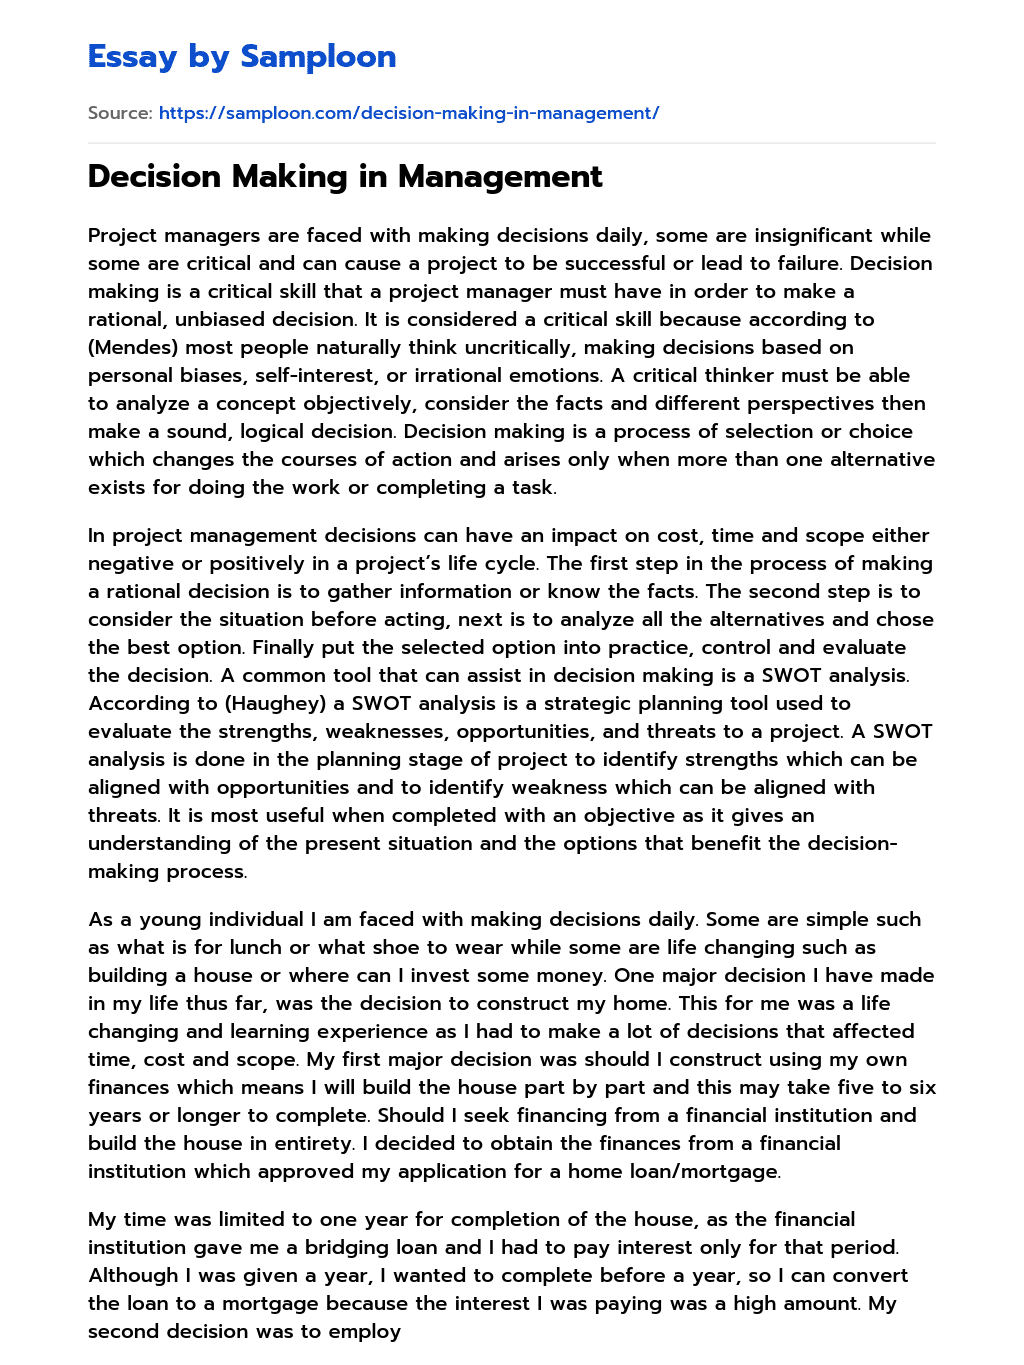 Decision Making in Management essay